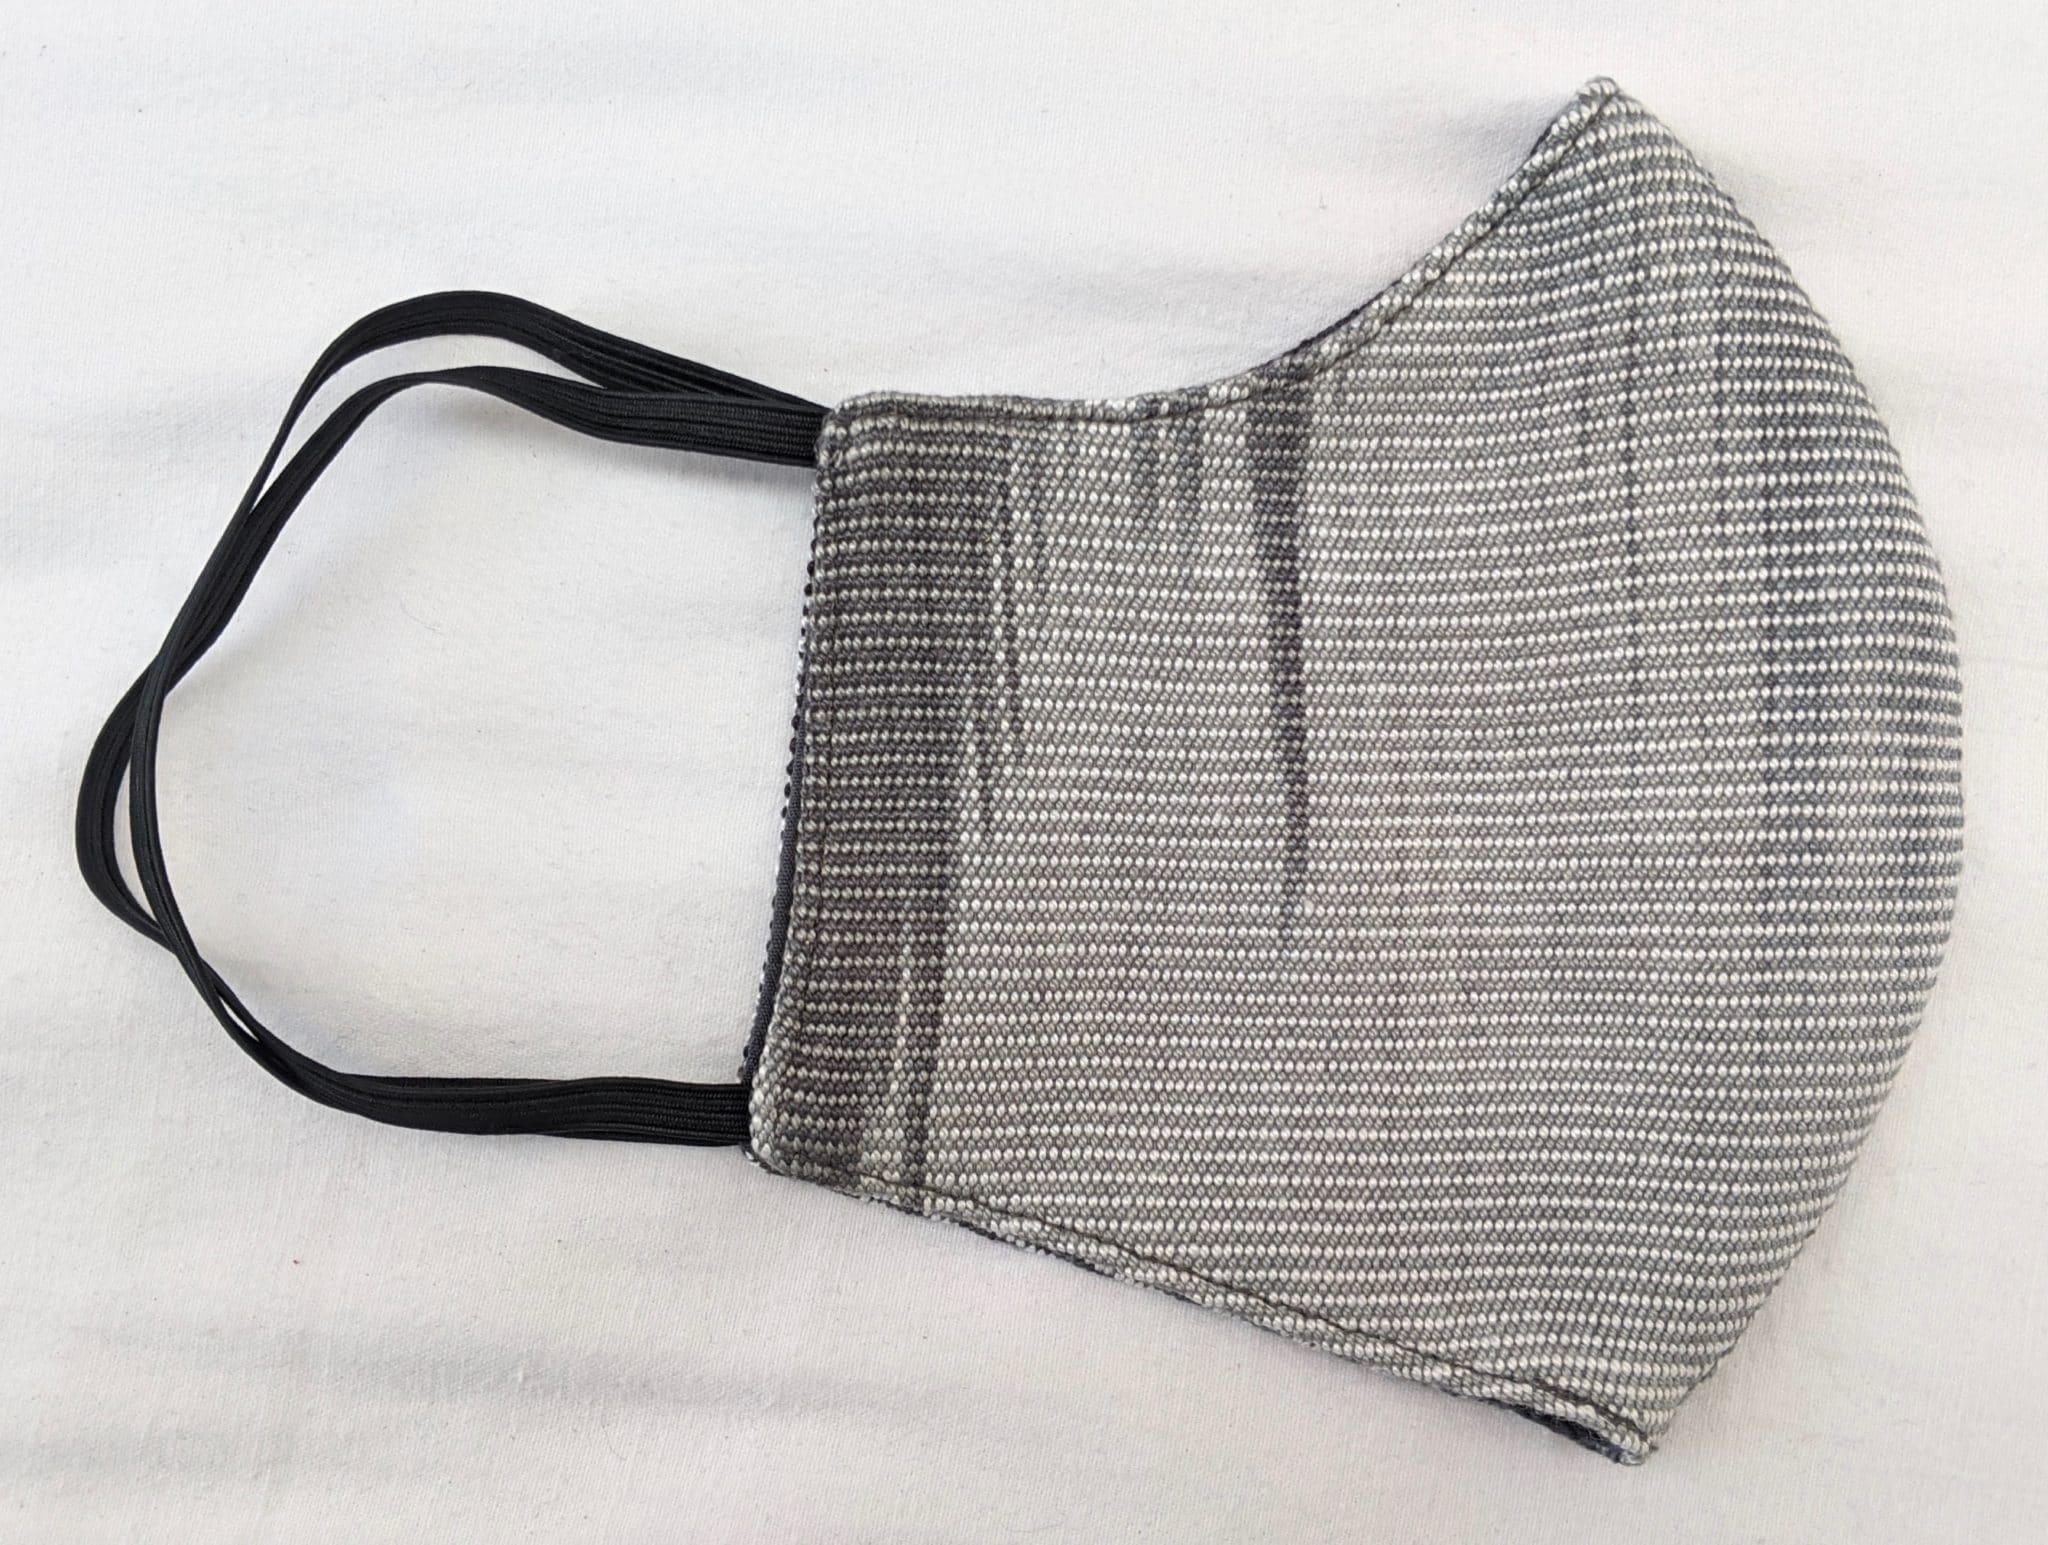 Handwoven Lightweight Bamboo Face Mask with Elastic Behind Ears - Black, White, Grays